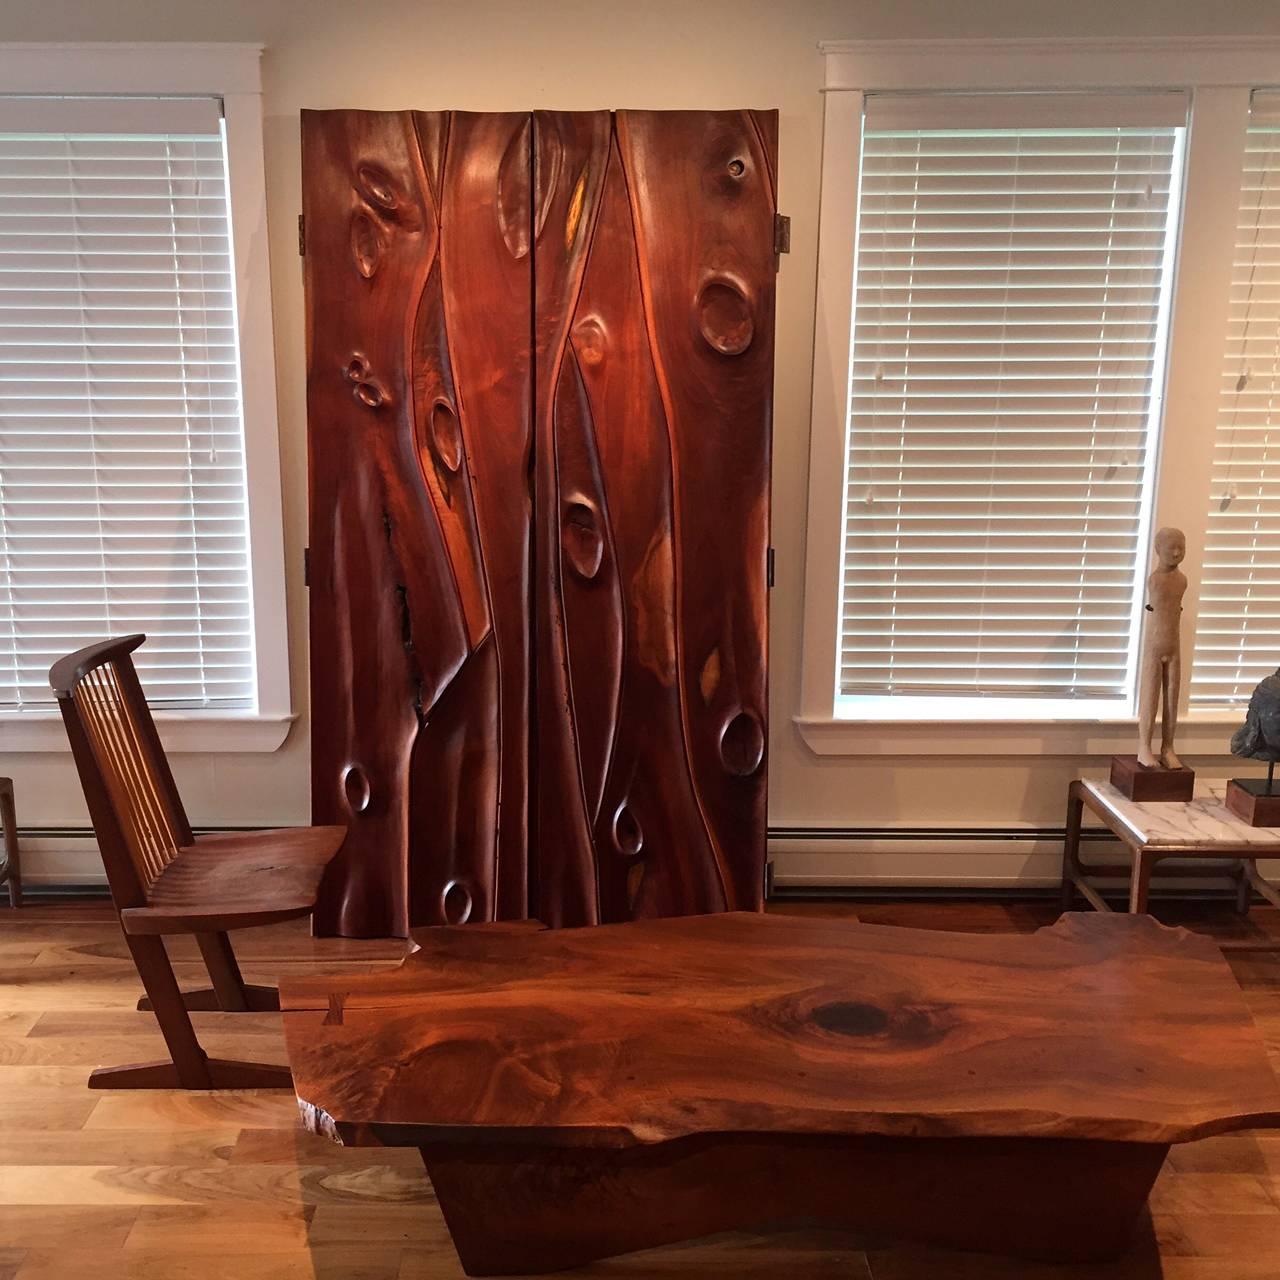 These two doors were commissioned directly from the artist and were made for a specific site . The front of the doors are wonderfully contoured and are highly sculptural. The design retains the original qualities of the wood including natural